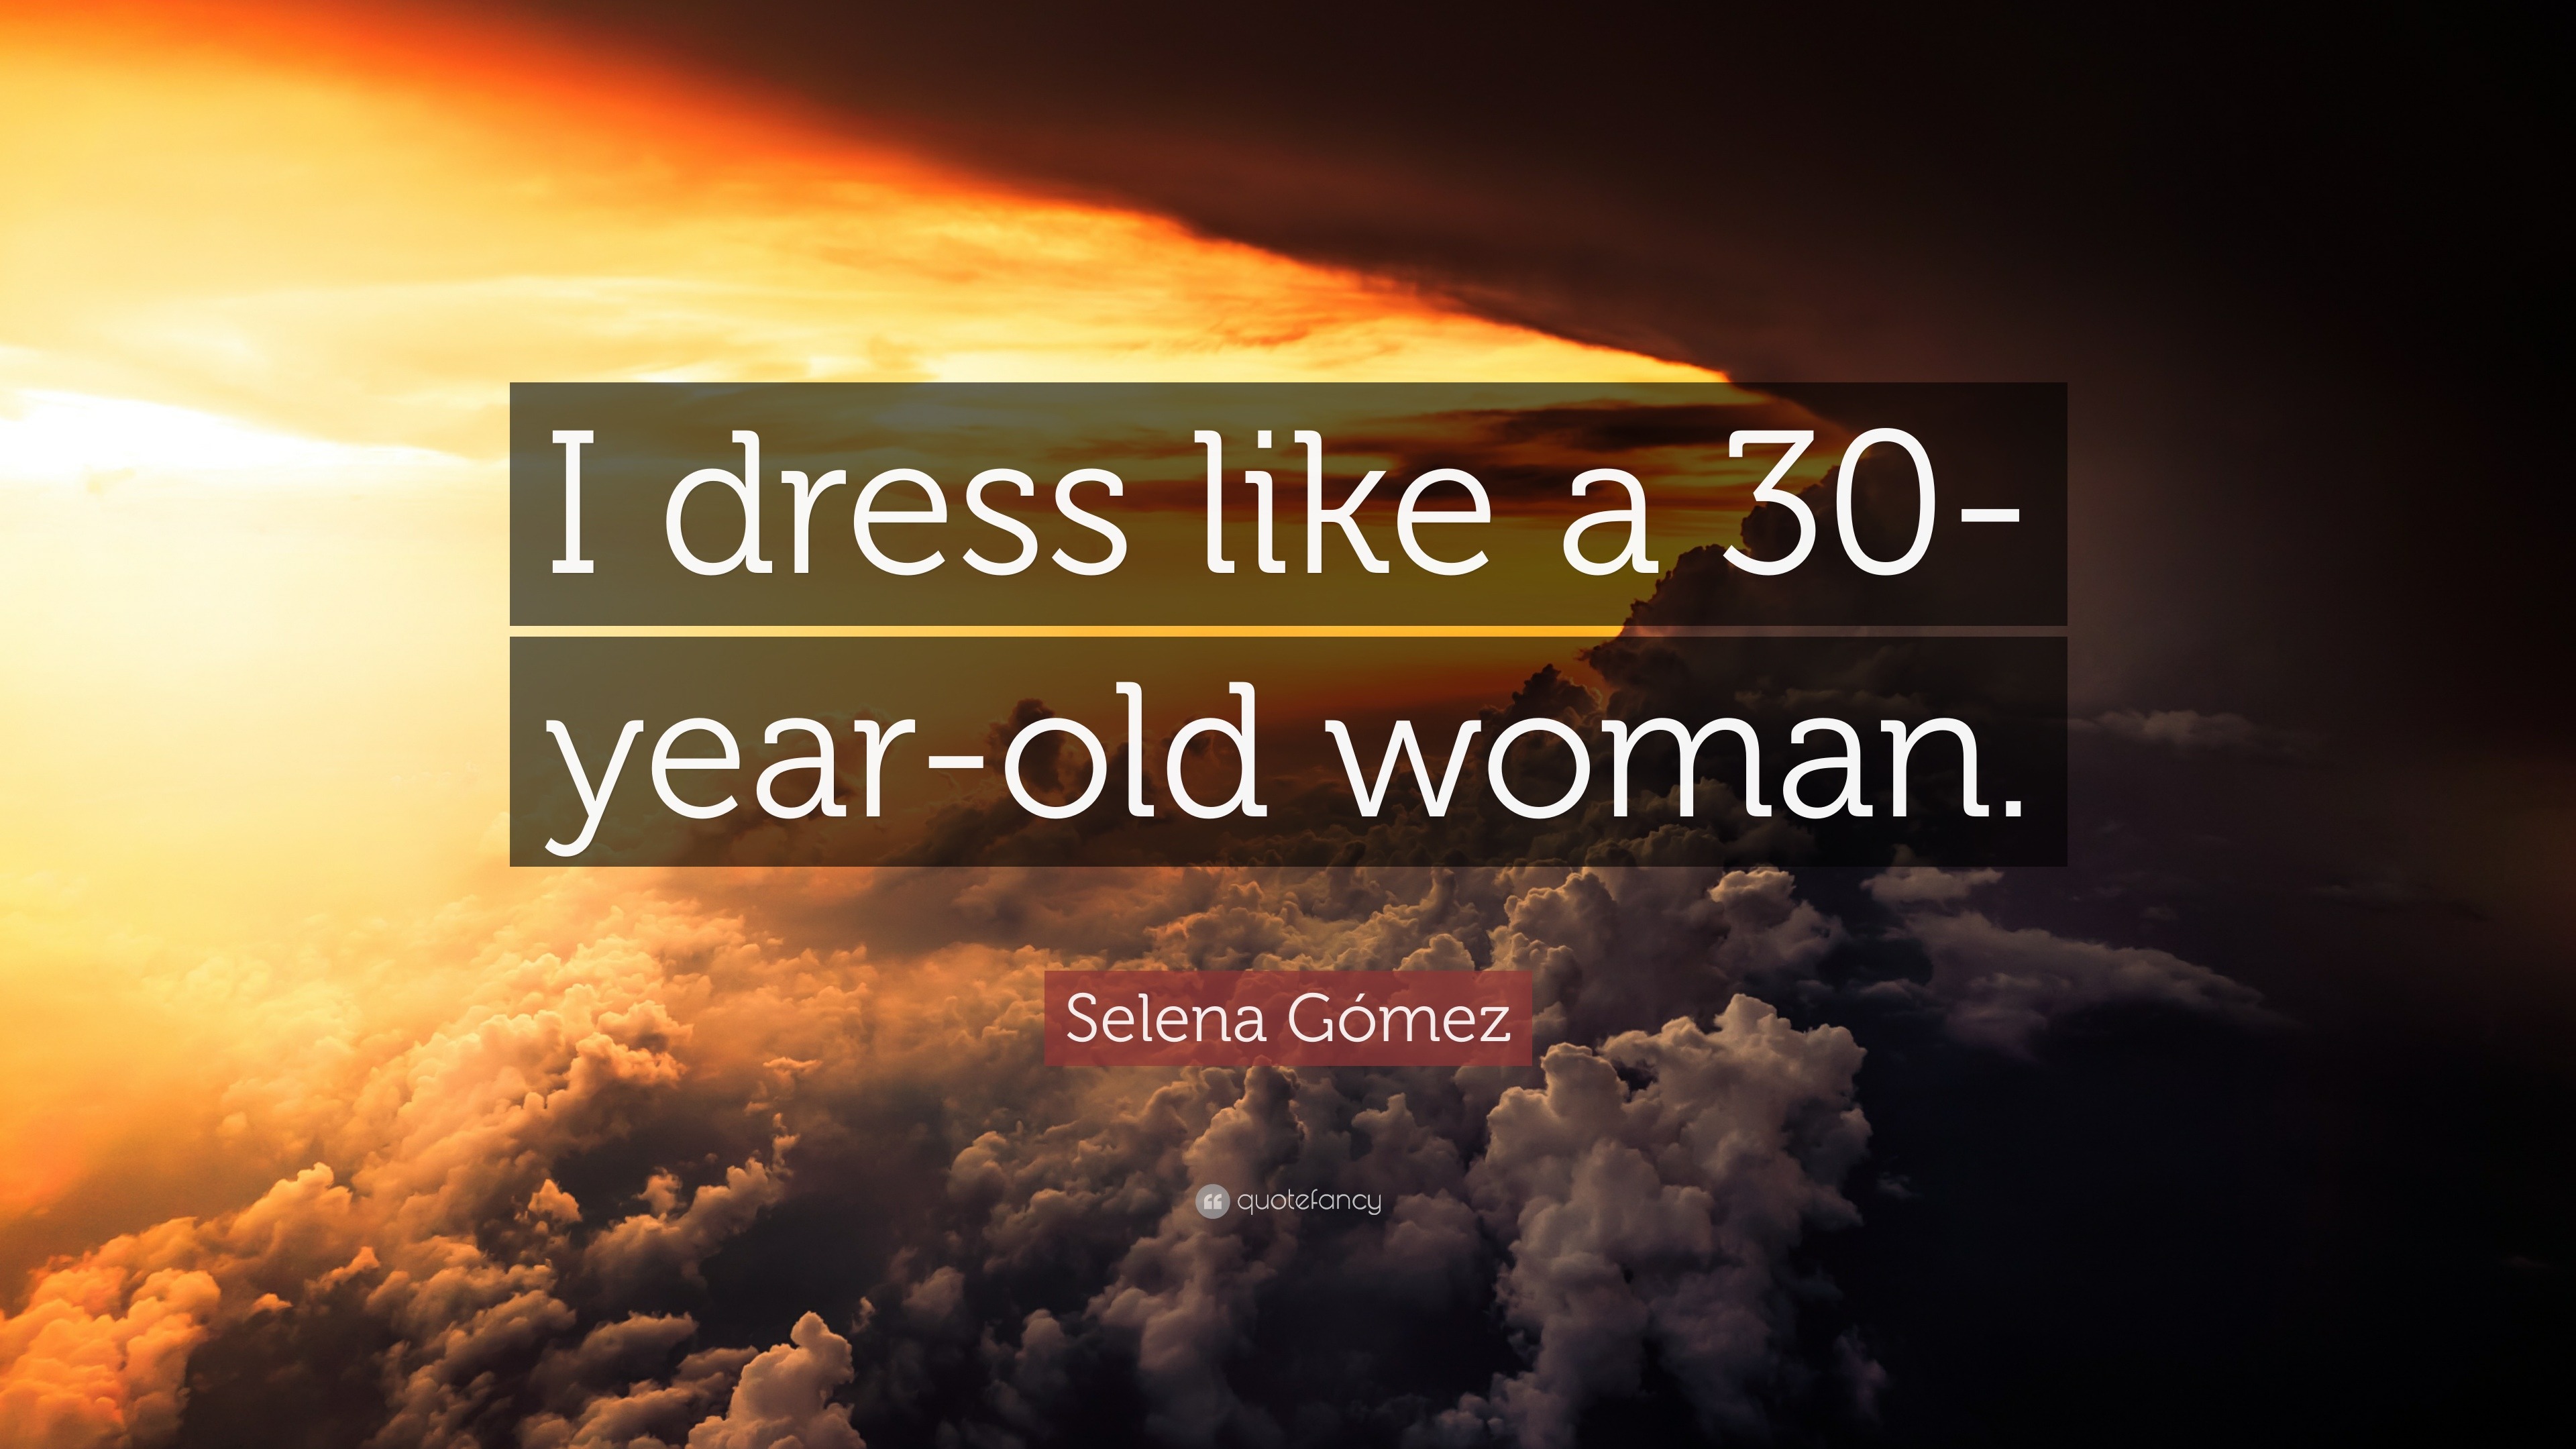 dress like a lady quotes